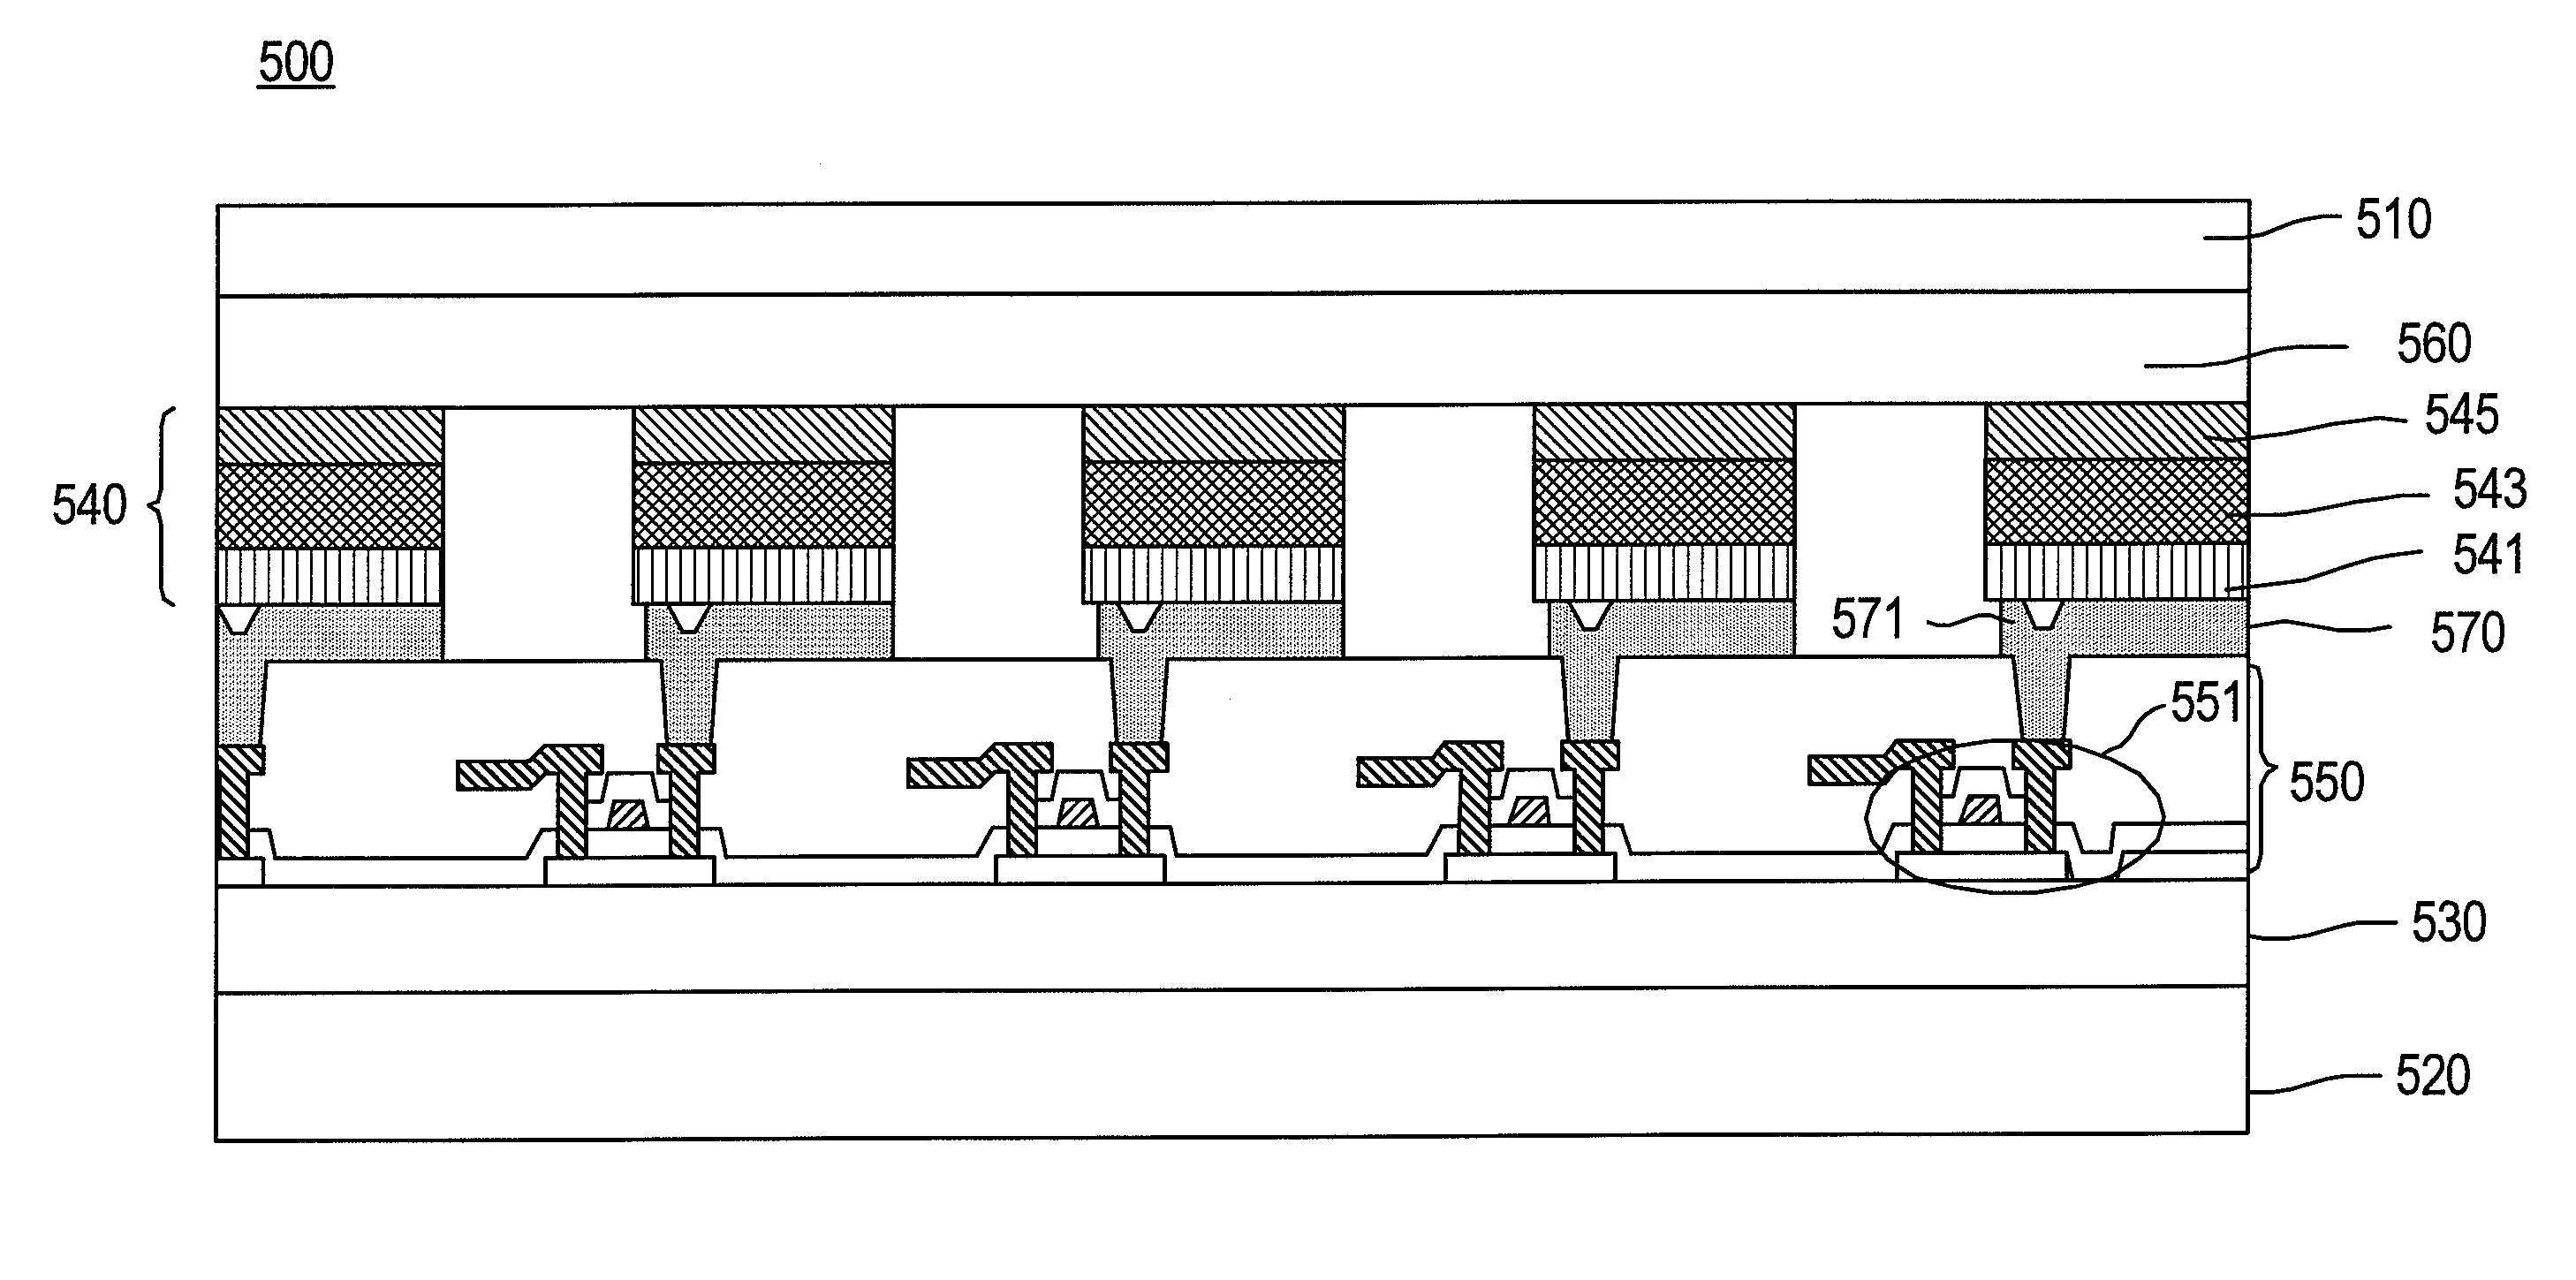 High-accuracy OLED touch display panel structure